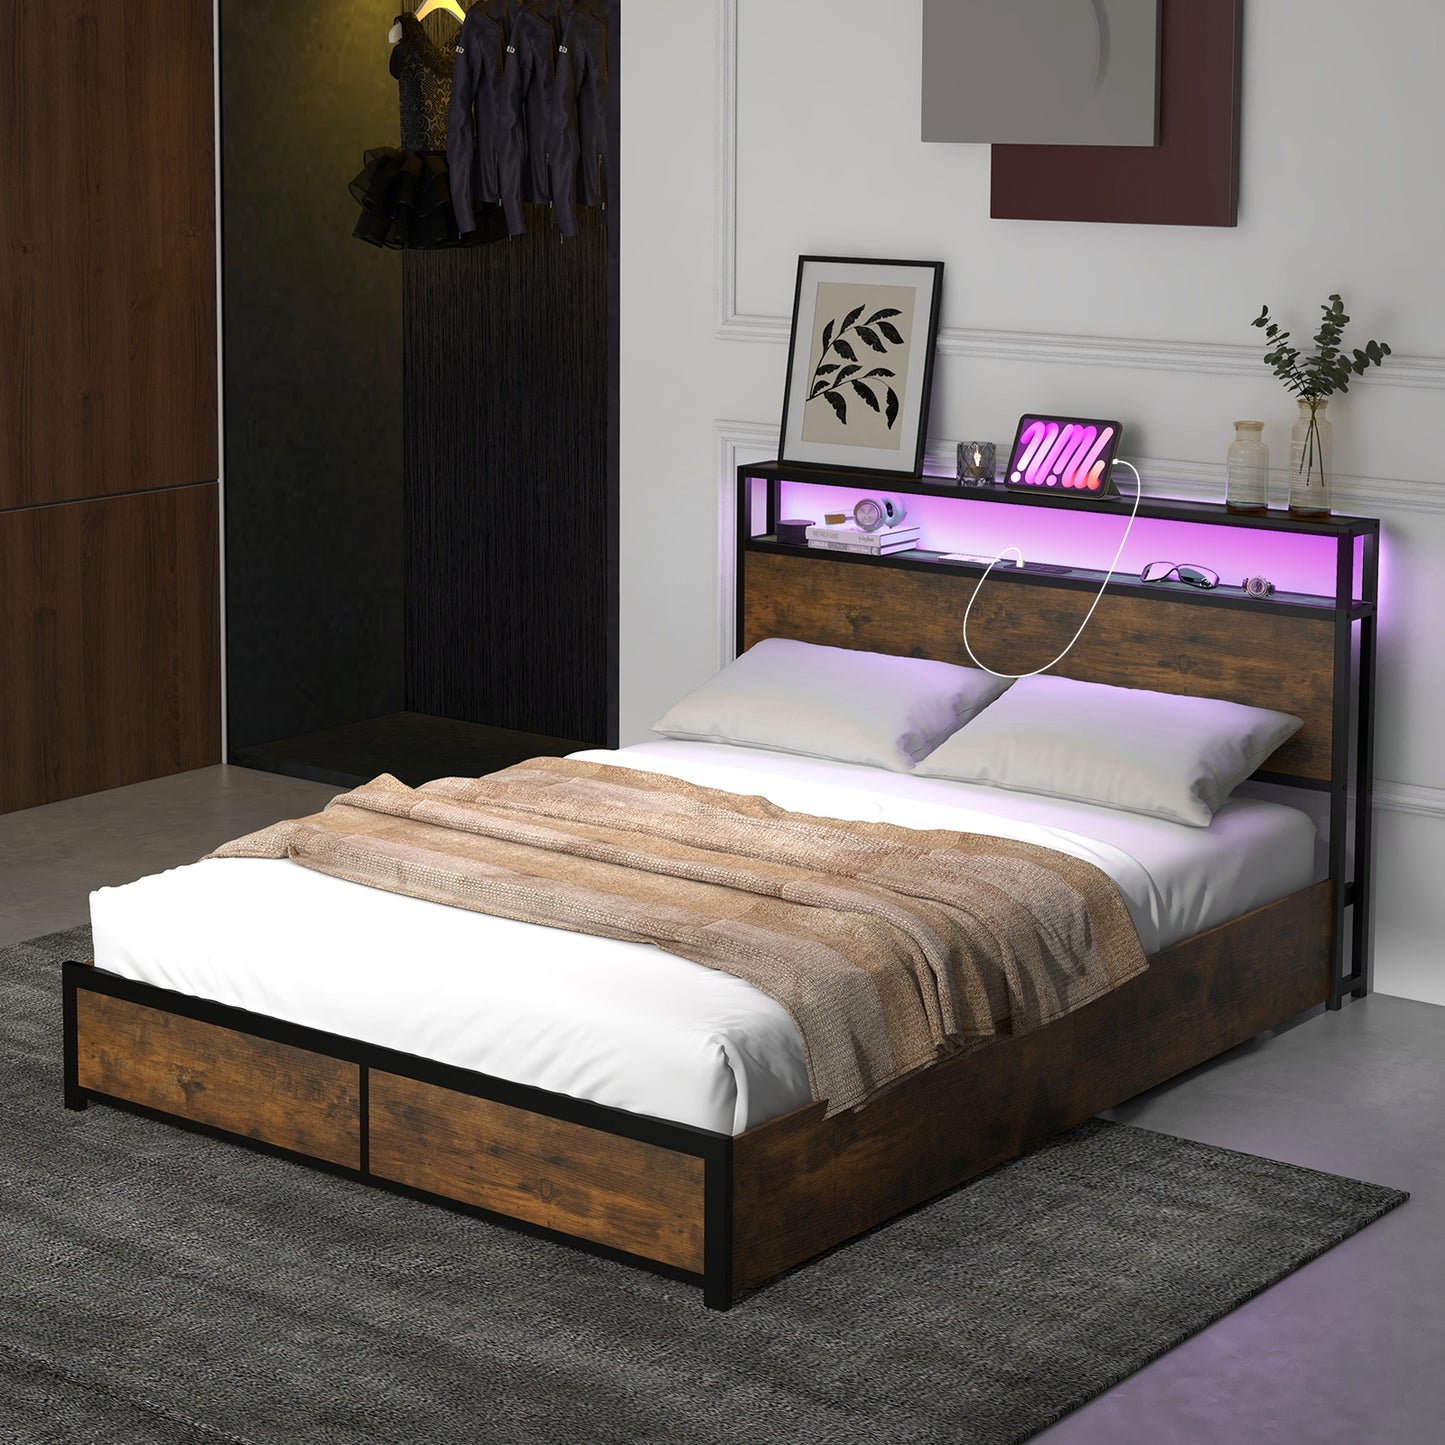 Double/King Size Bed Frame with LED Lights Headboard-Double Size